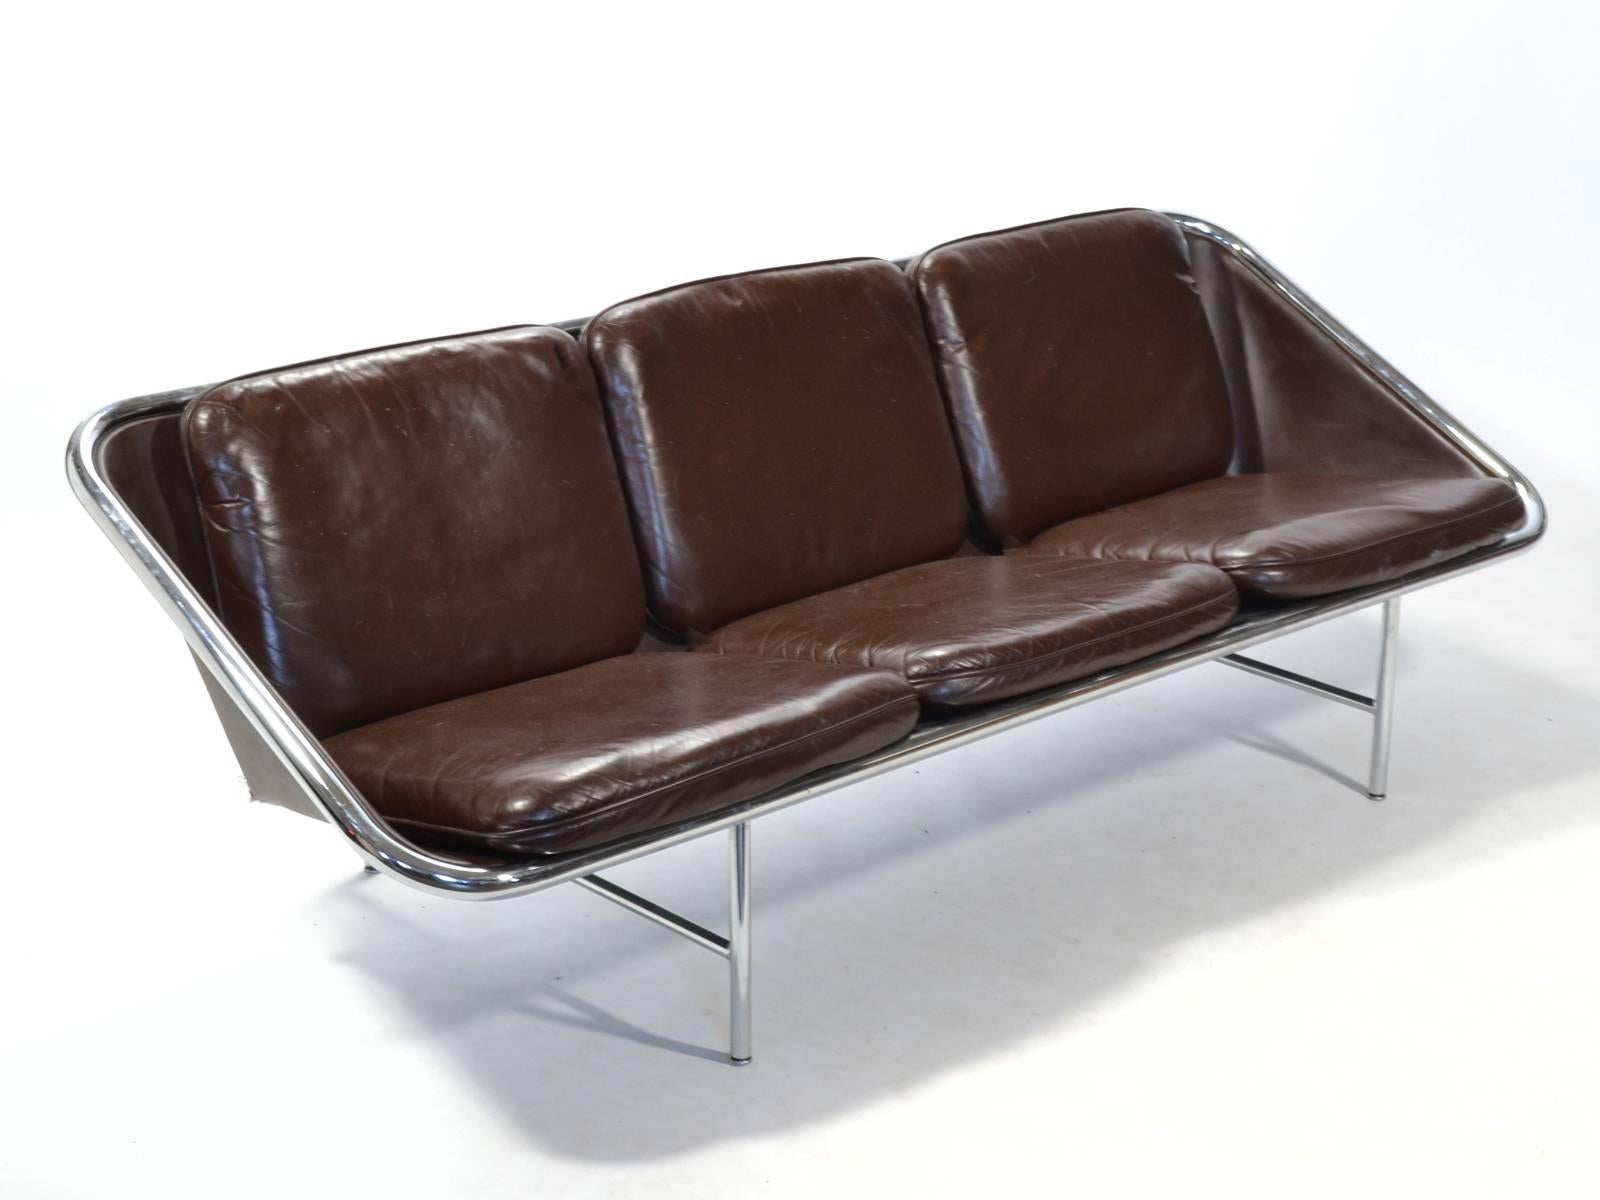 Nelson's sling sofa from 1963 is an innovative design which uses a chrome-plated tubular steel frame, thick leather, neoprene and reinforced rubber 